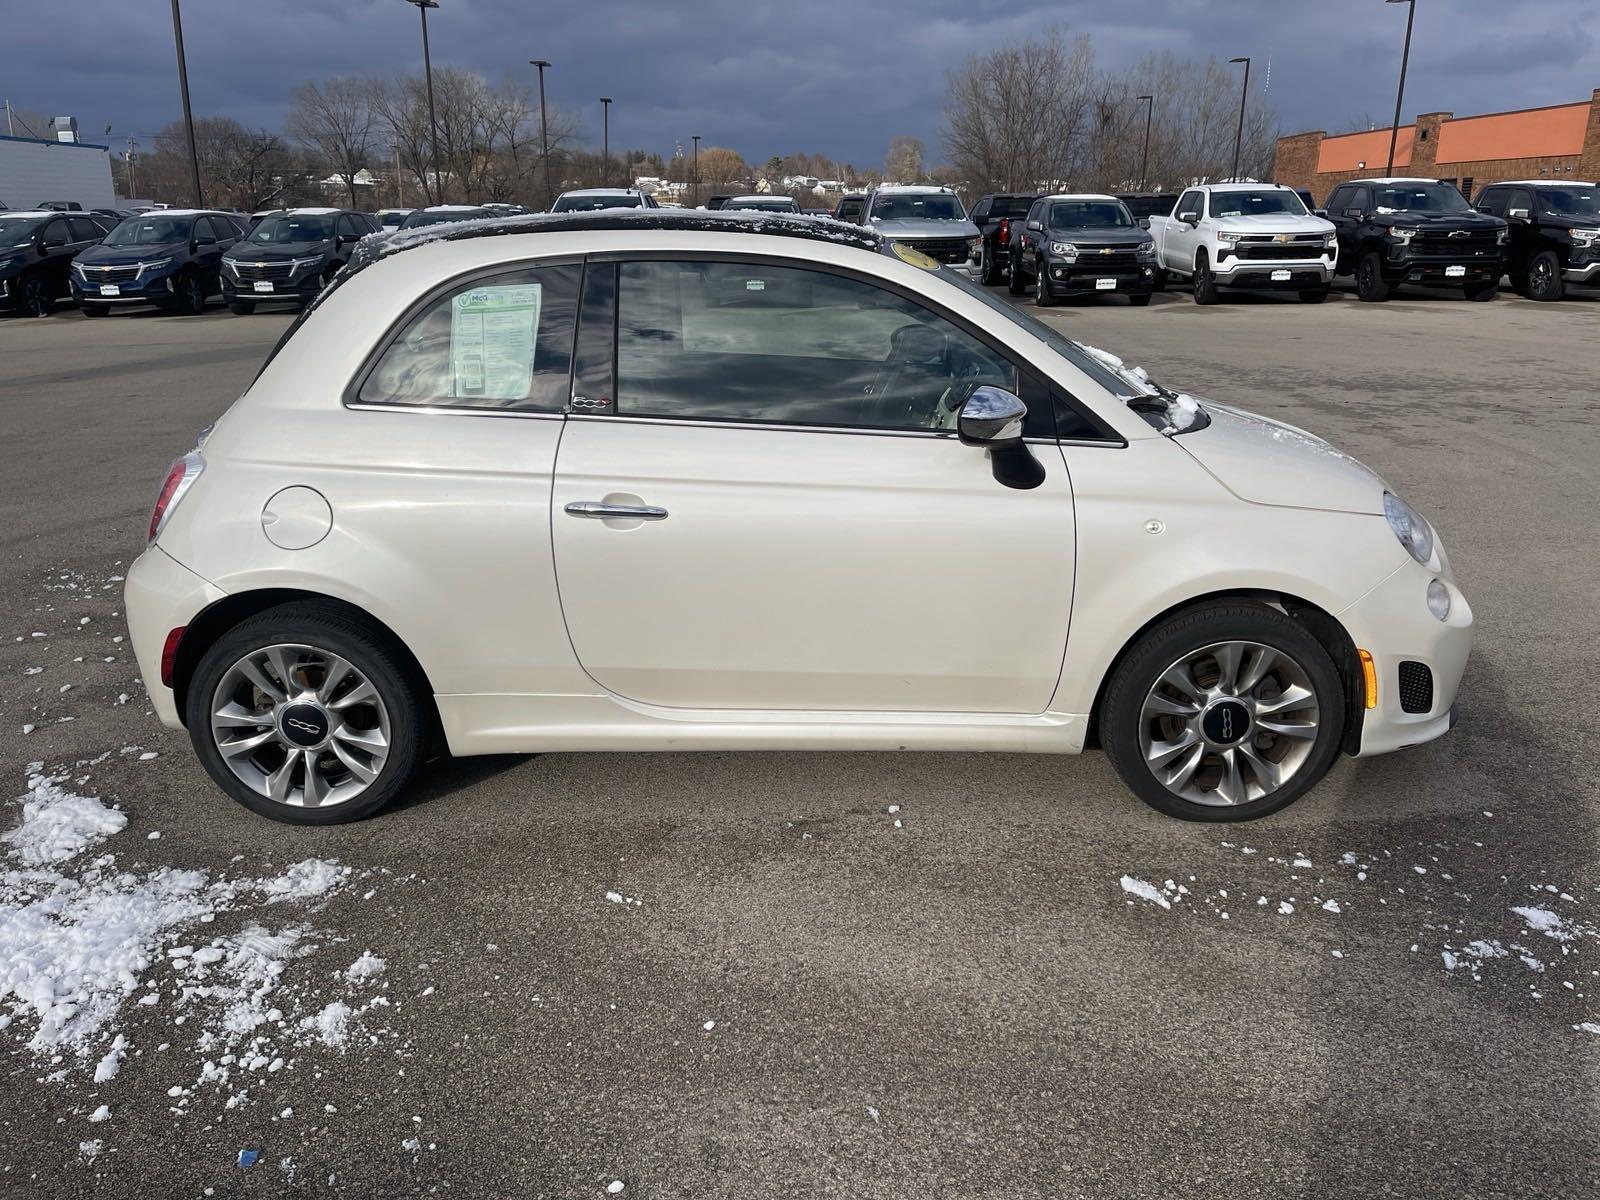 Used 2018 FIAT 500c For Sale at McGrath Volkswagen of Dubuque | Stock  #F31368